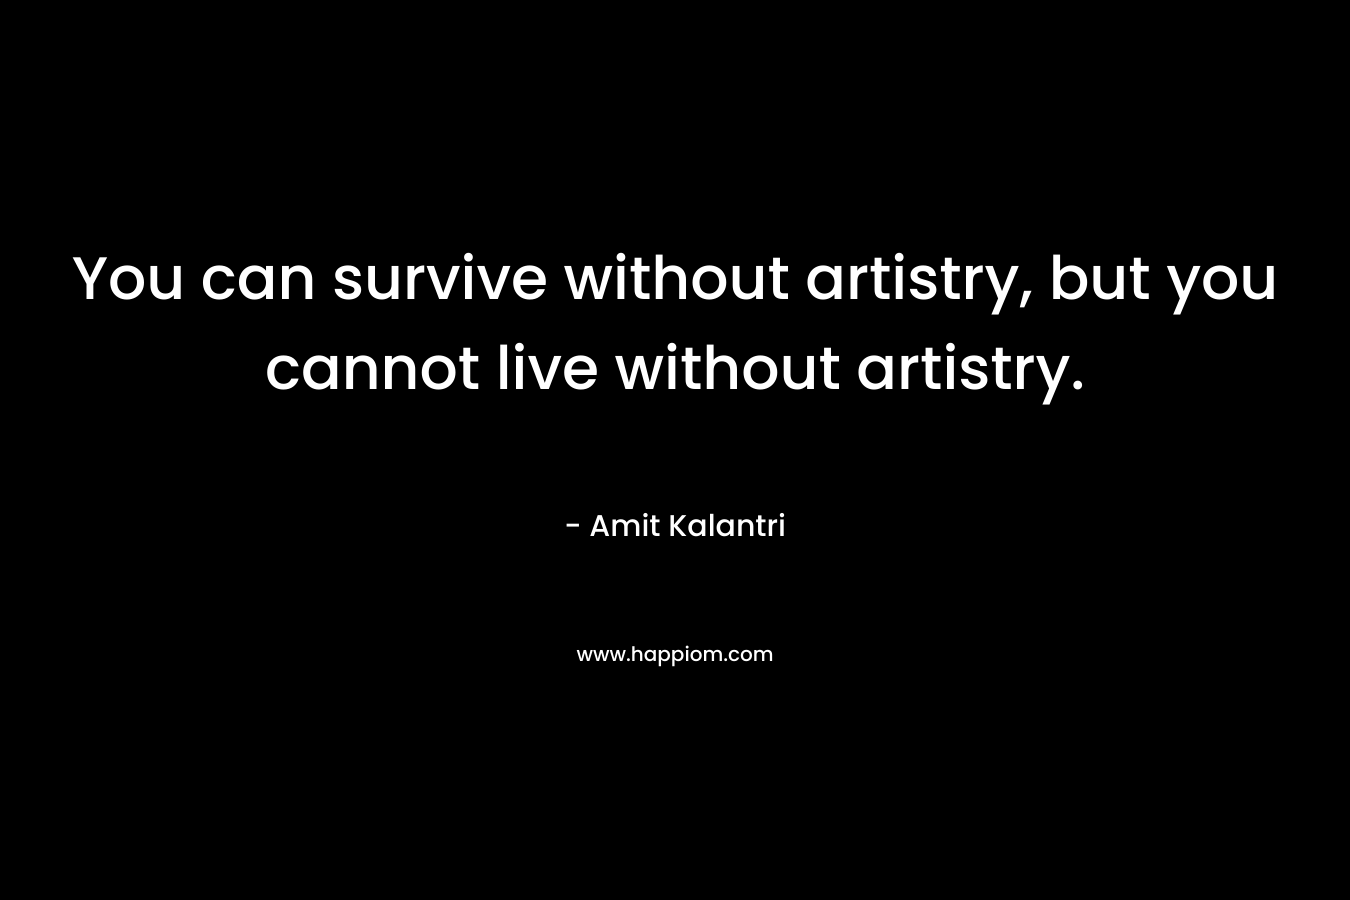 You can survive without artistry, but you cannot live without artistry. – Amit Kalantri